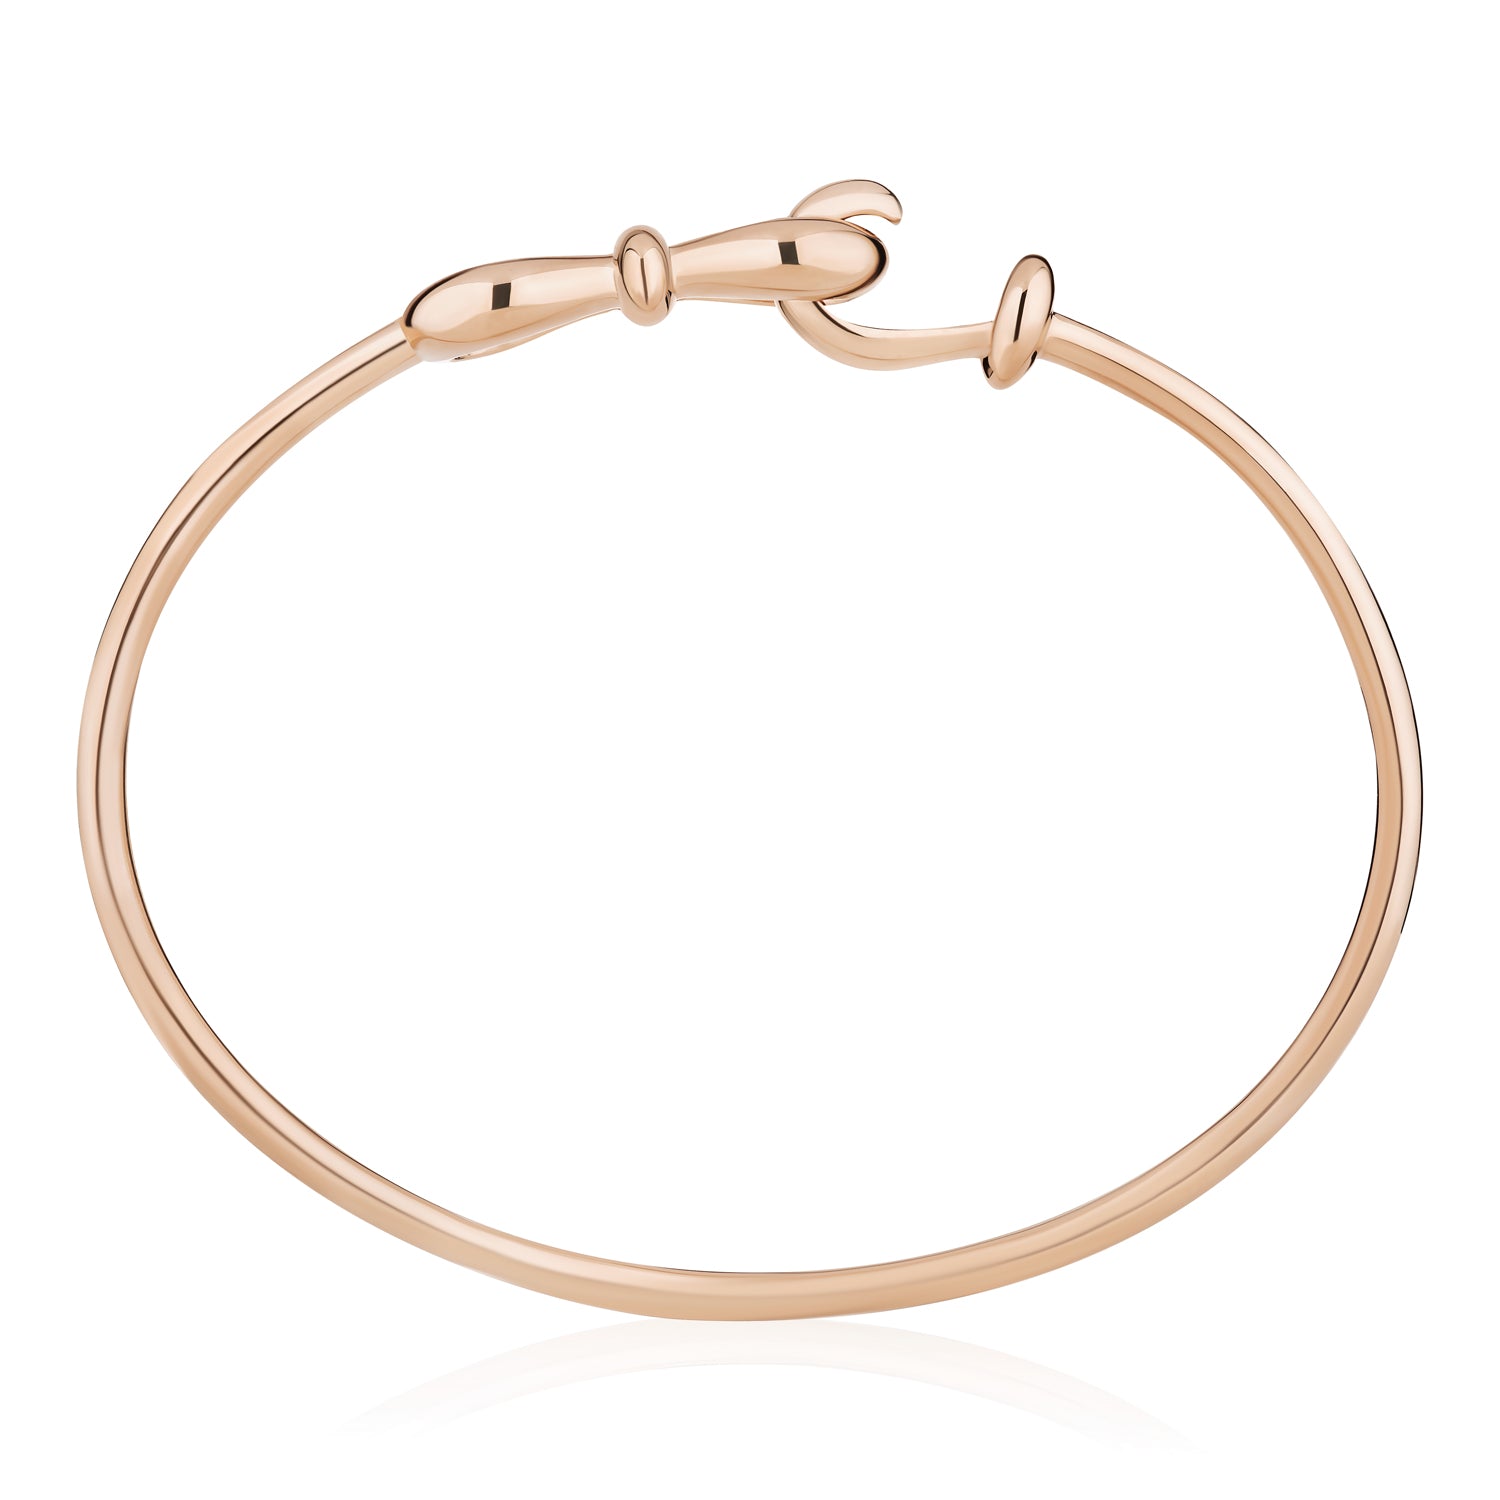 Together Forever Infinity Bangle in Rose Gold